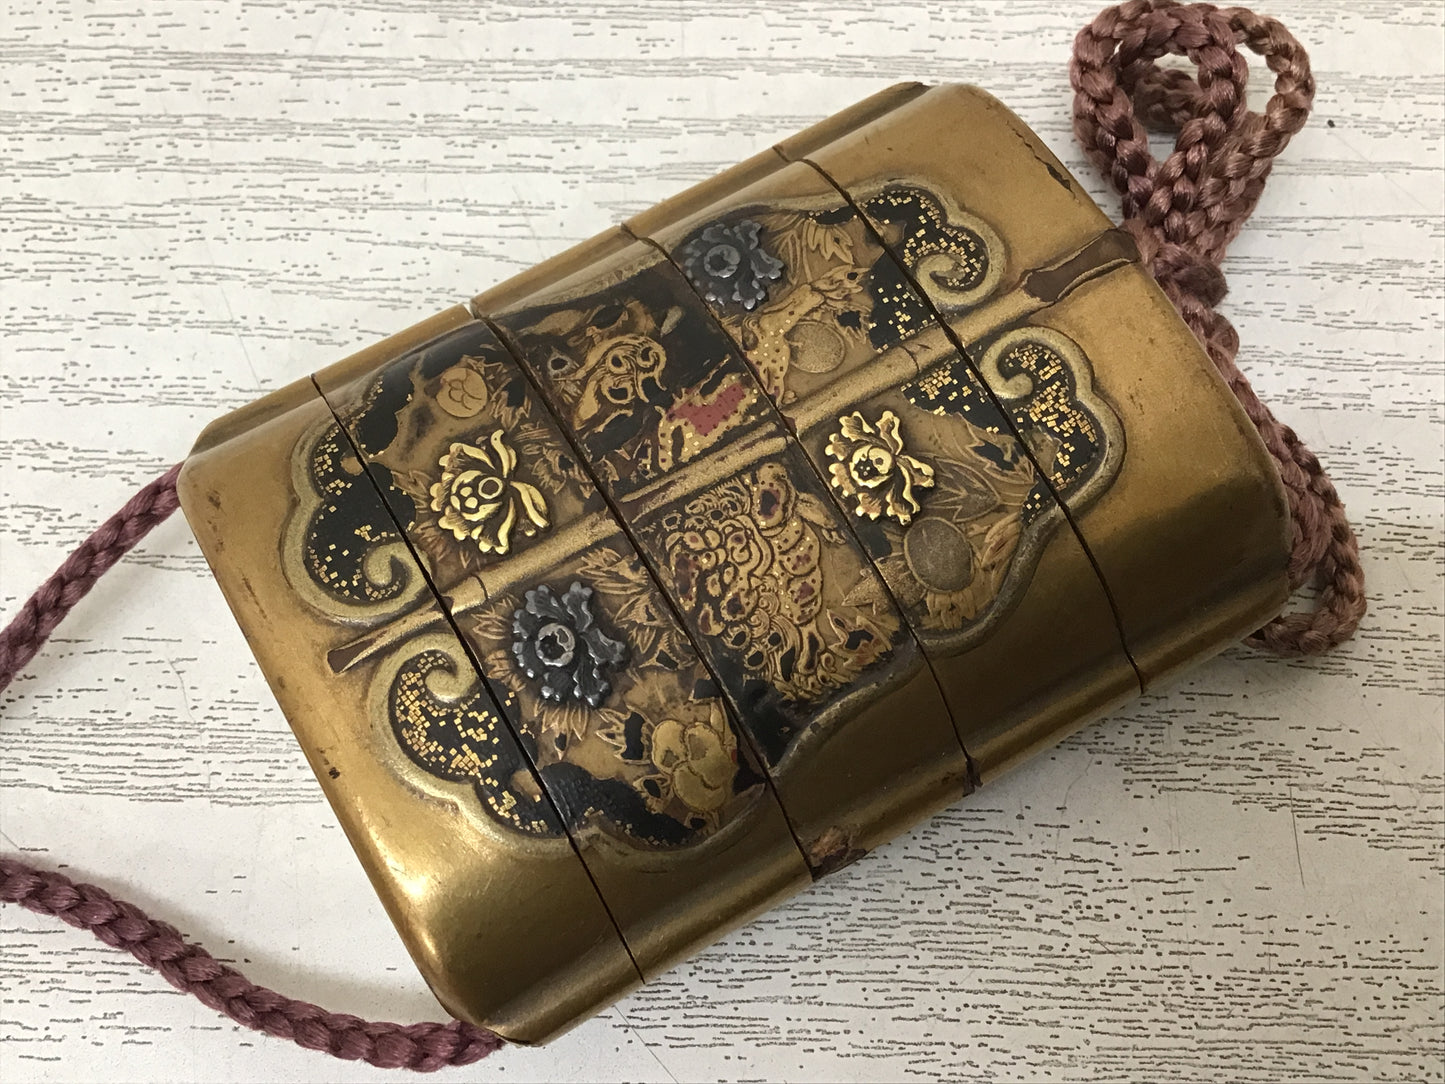 Y2743 INROU Makie Lacquer Pill Box Japanese antique traditional vintage